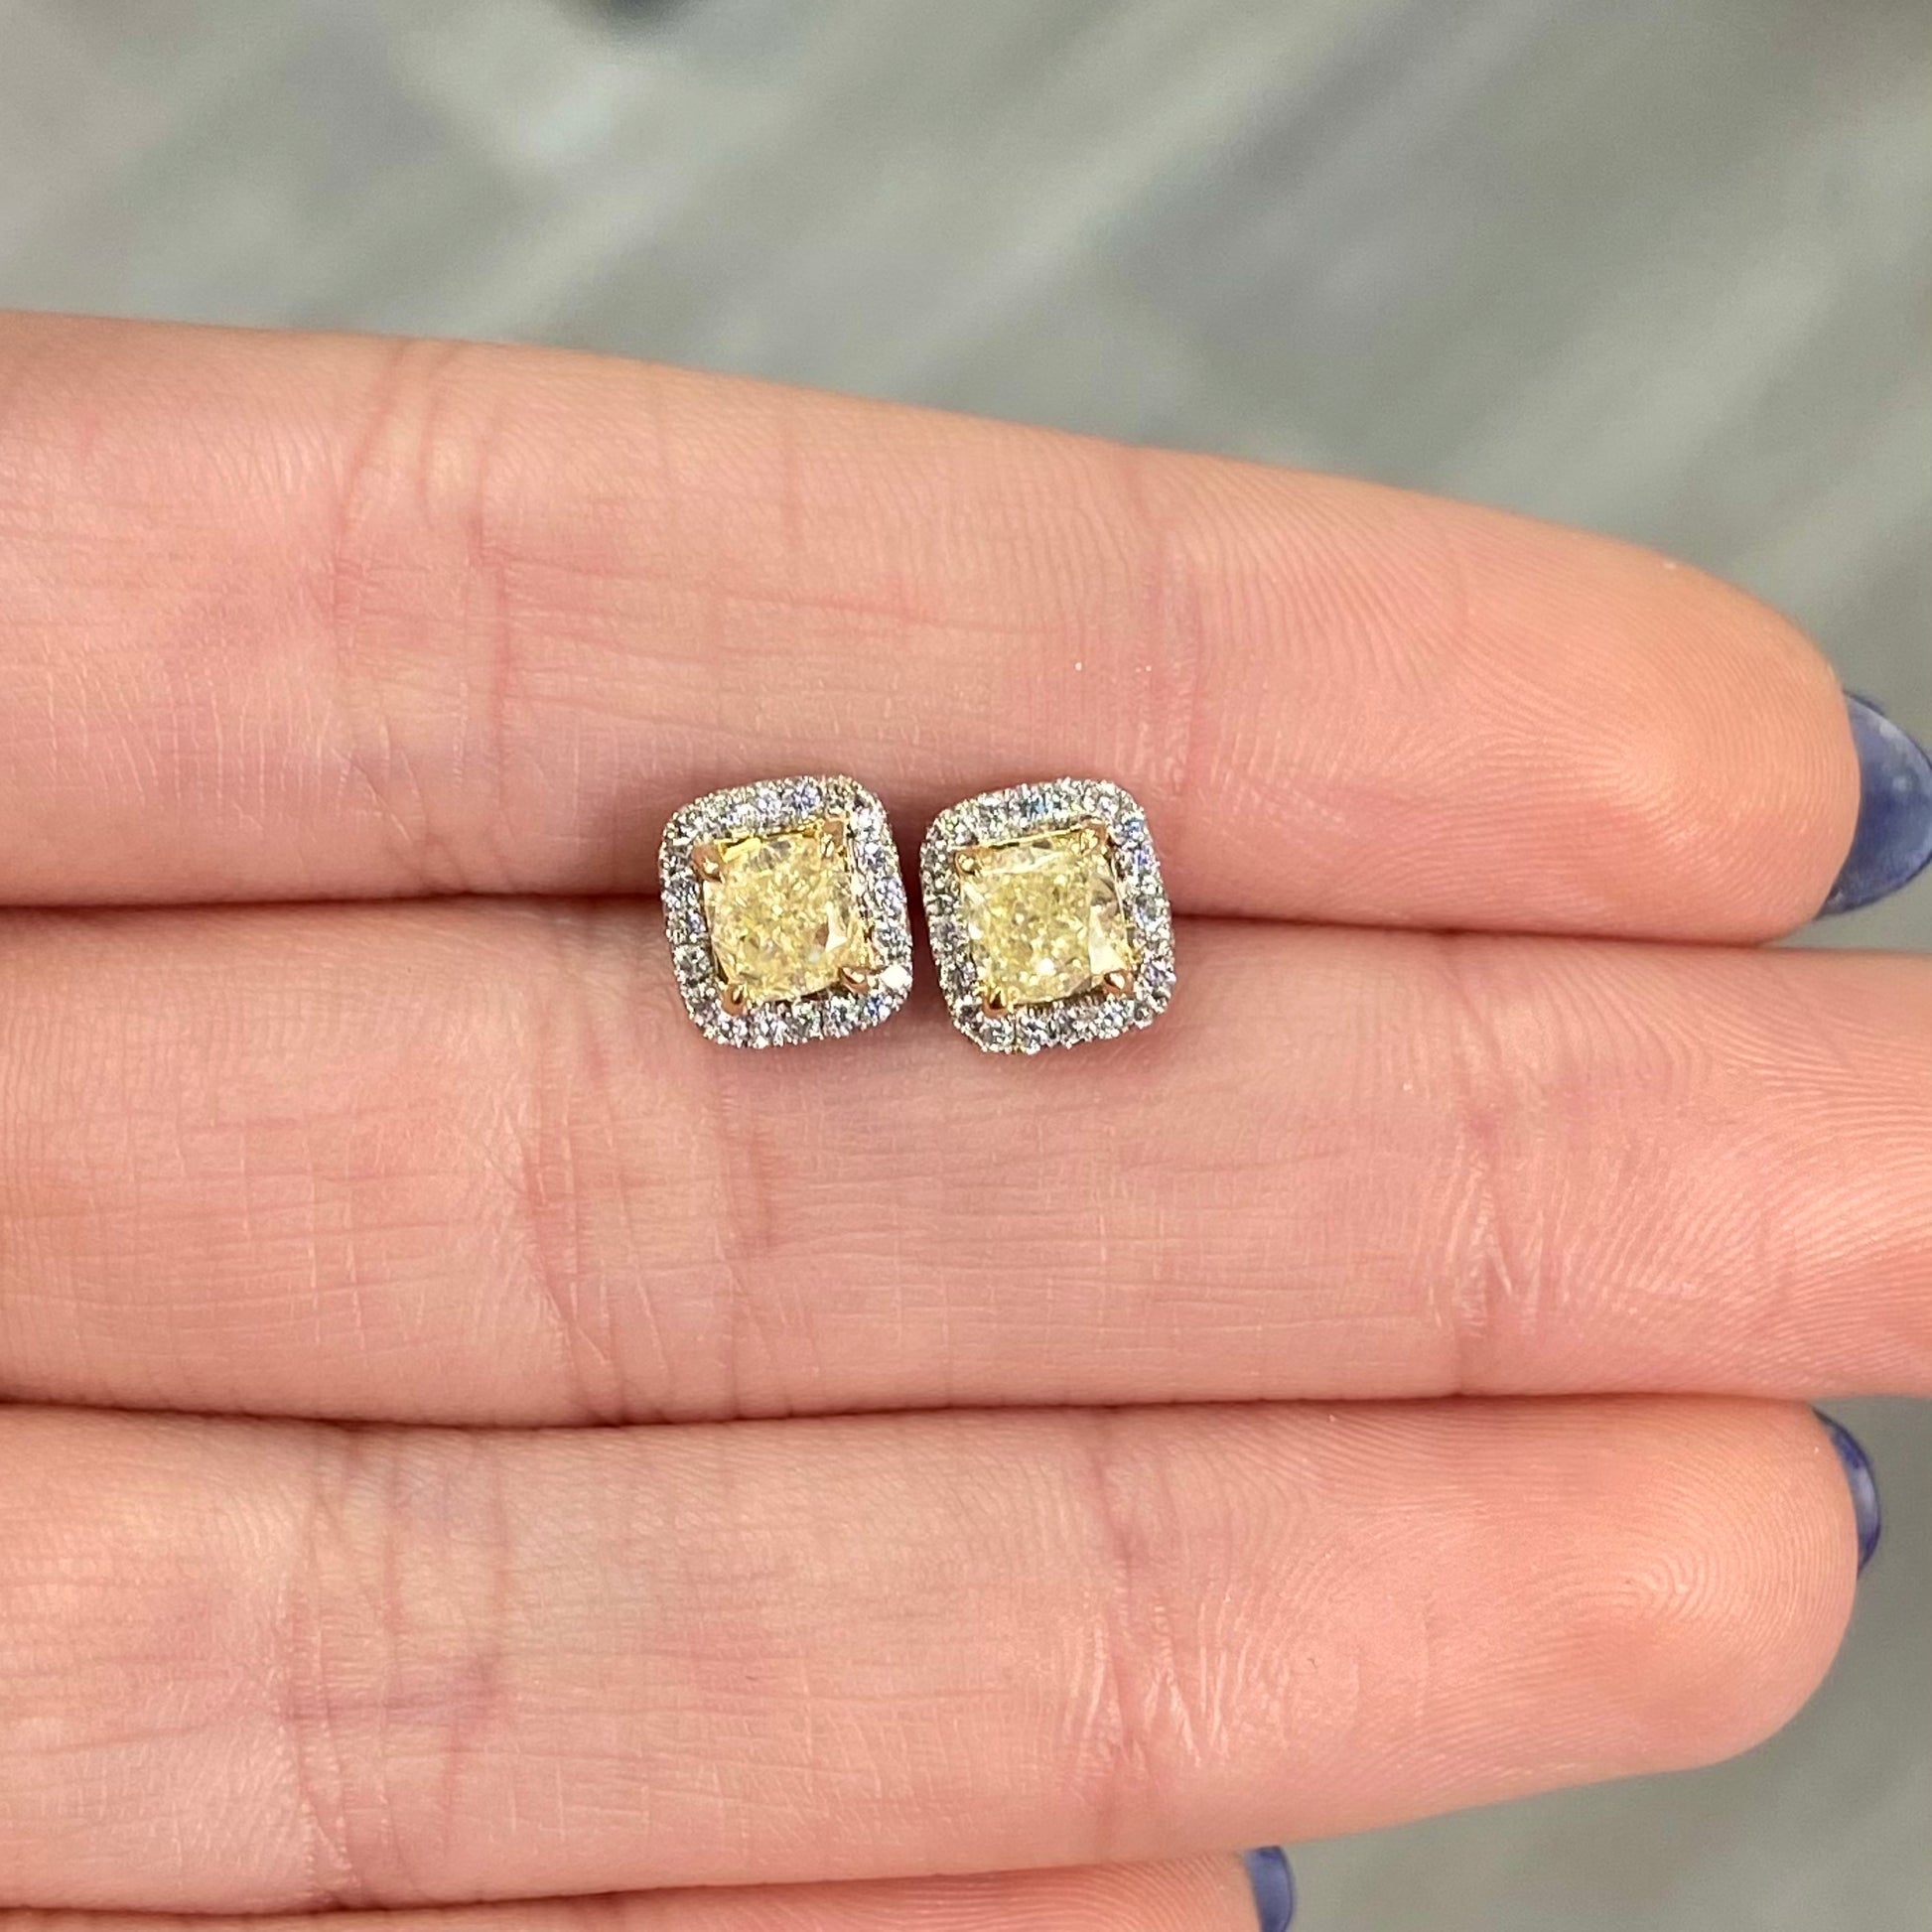 Fancy Light Yellow Cushion Diamond Studs 1.42 carat total center diamonds  Center diamonds are 0.71ct each  Surrounded by 0.22 Carats of White Radiant Diamonds Set in 18k Gold Handmade in NYC 